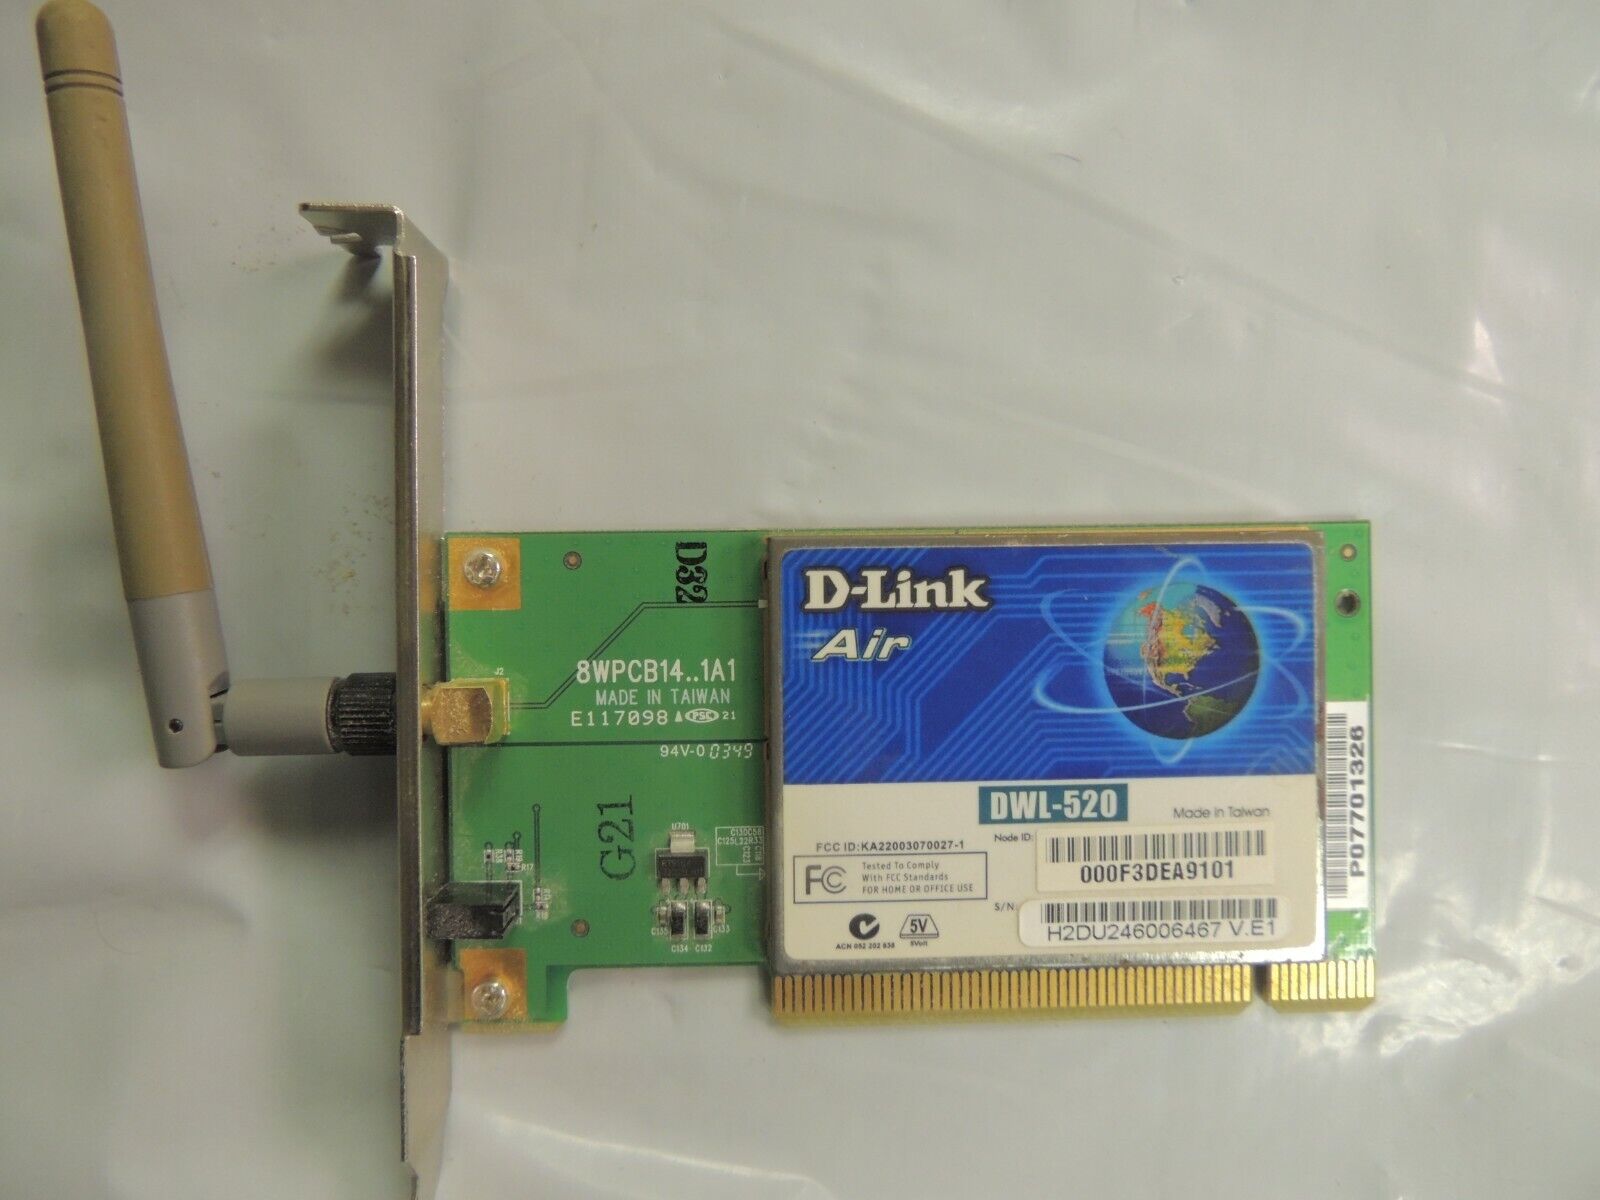 D-Link Air DWL-520 Wireless Network PCI Card with Antenna